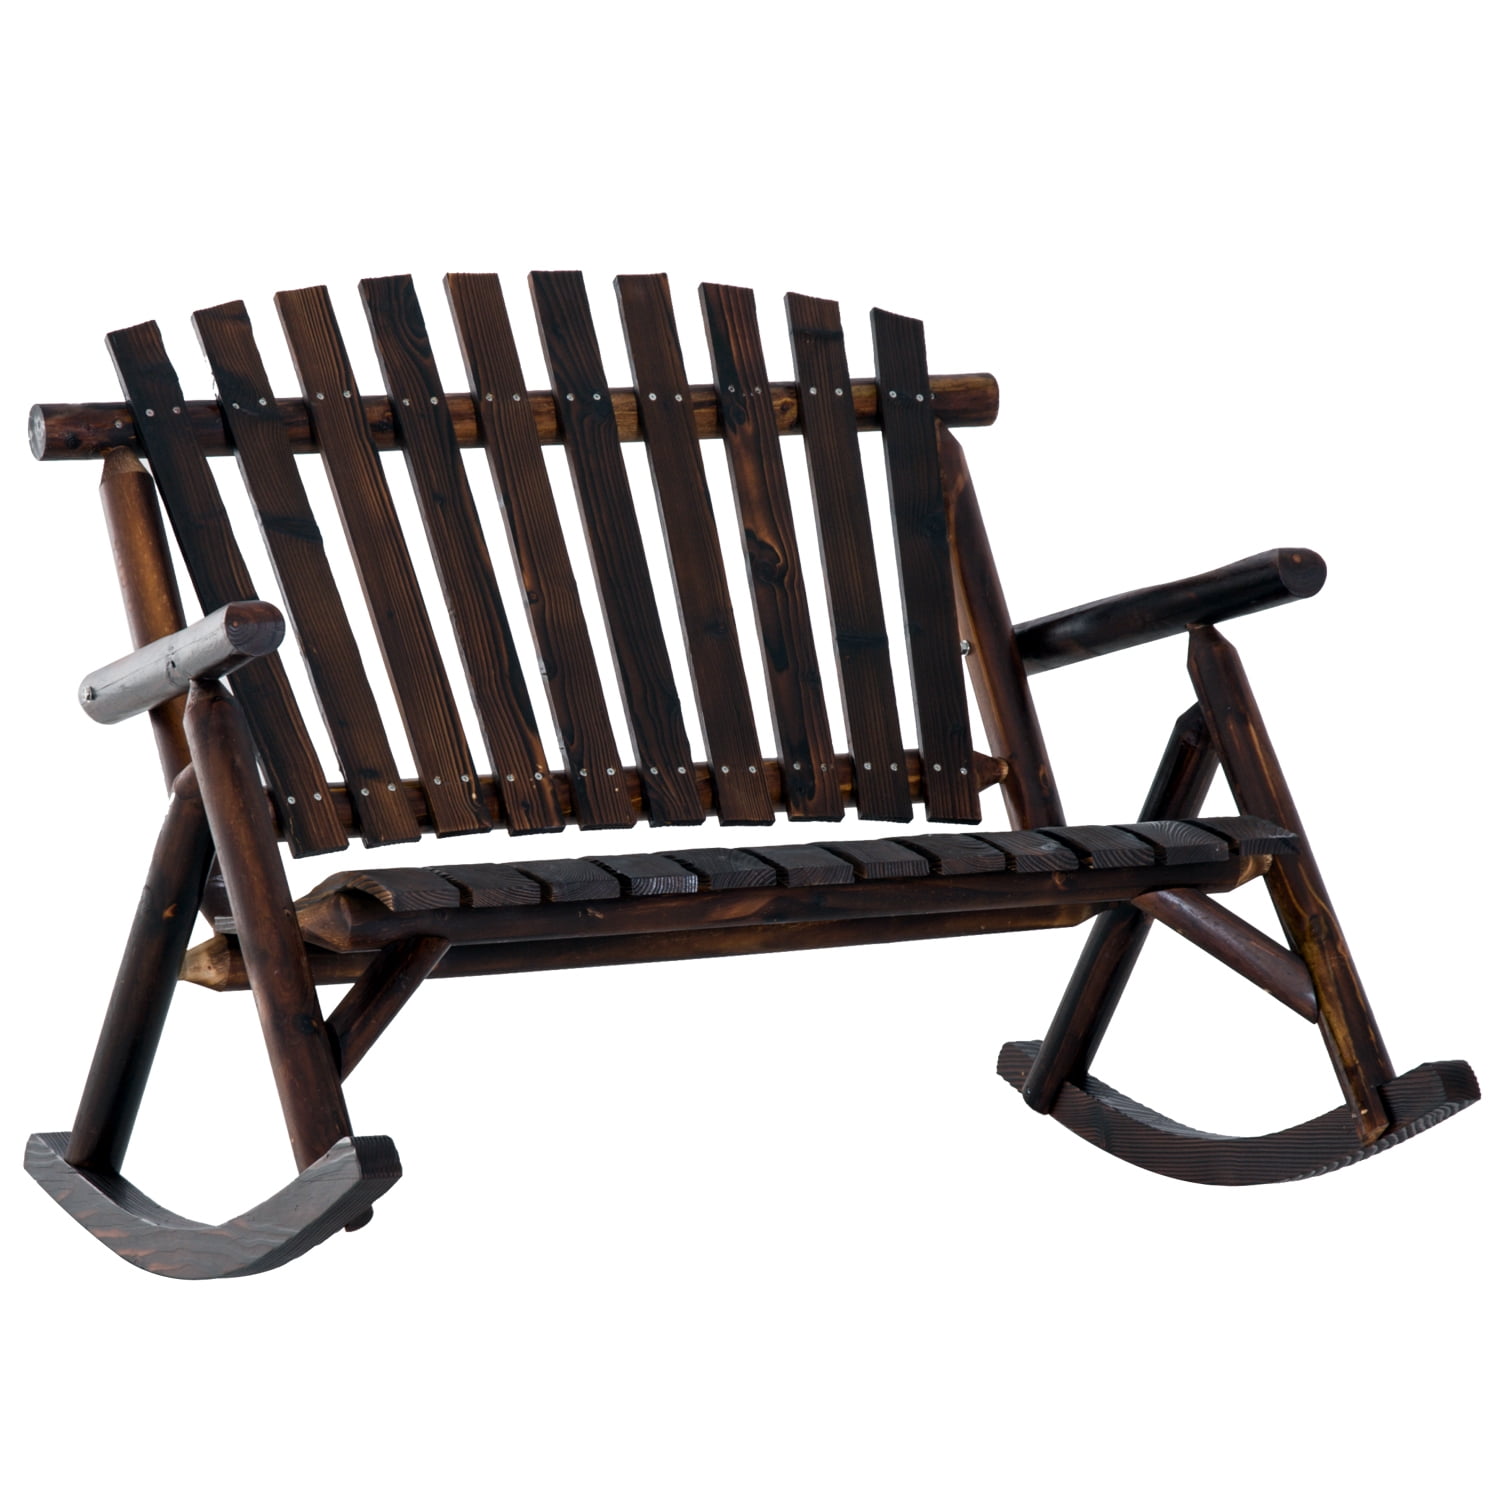 Outsunny Outdoor Rustic Double Rocking Chair Adirondack